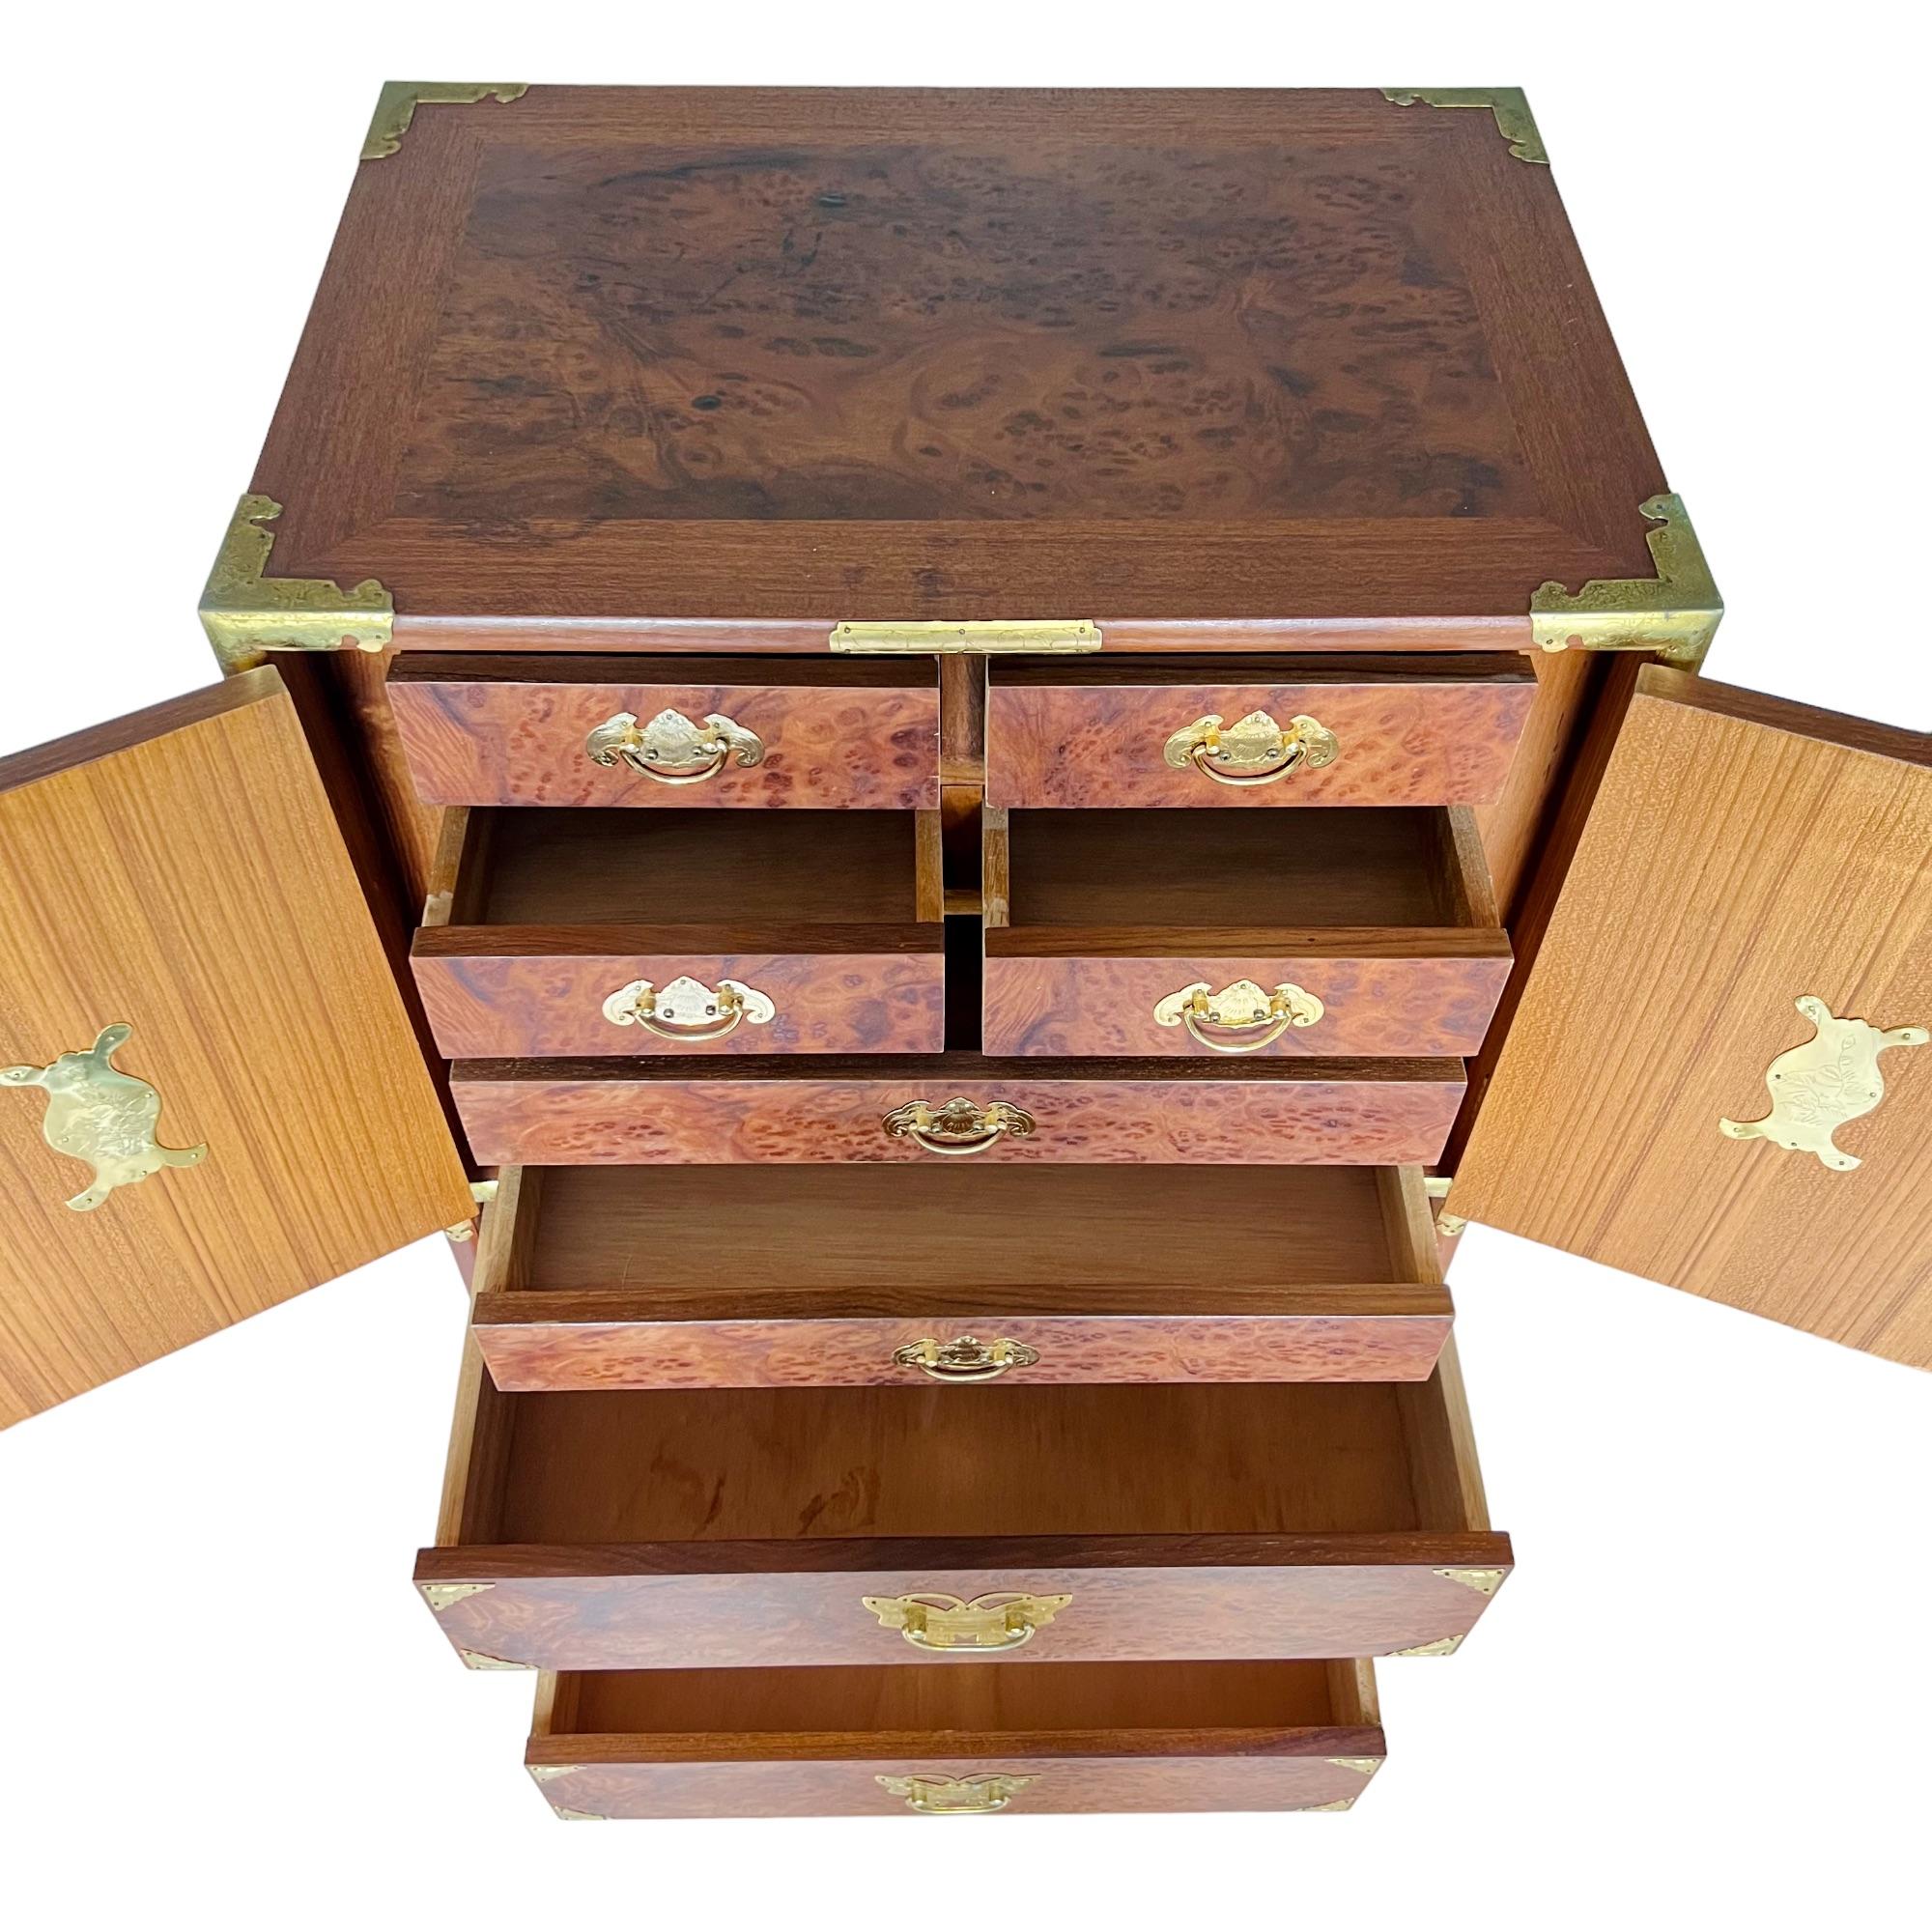 20th Century Chinese Lingerie Chest and Korean Apothecary Cabinet, a Set